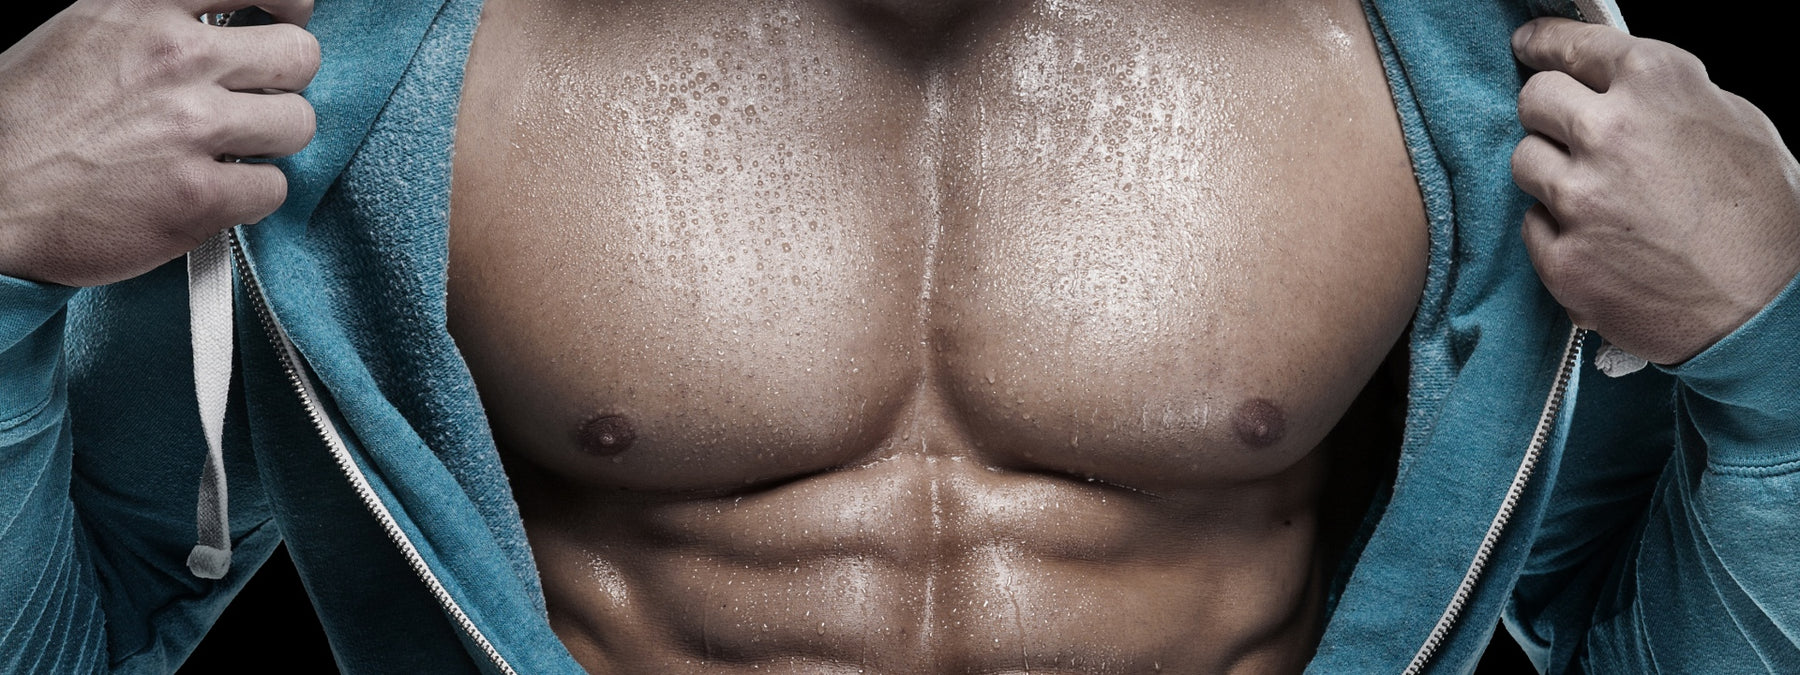 Move Beyond The Bench Press With These 5 Killer Chest Exercises